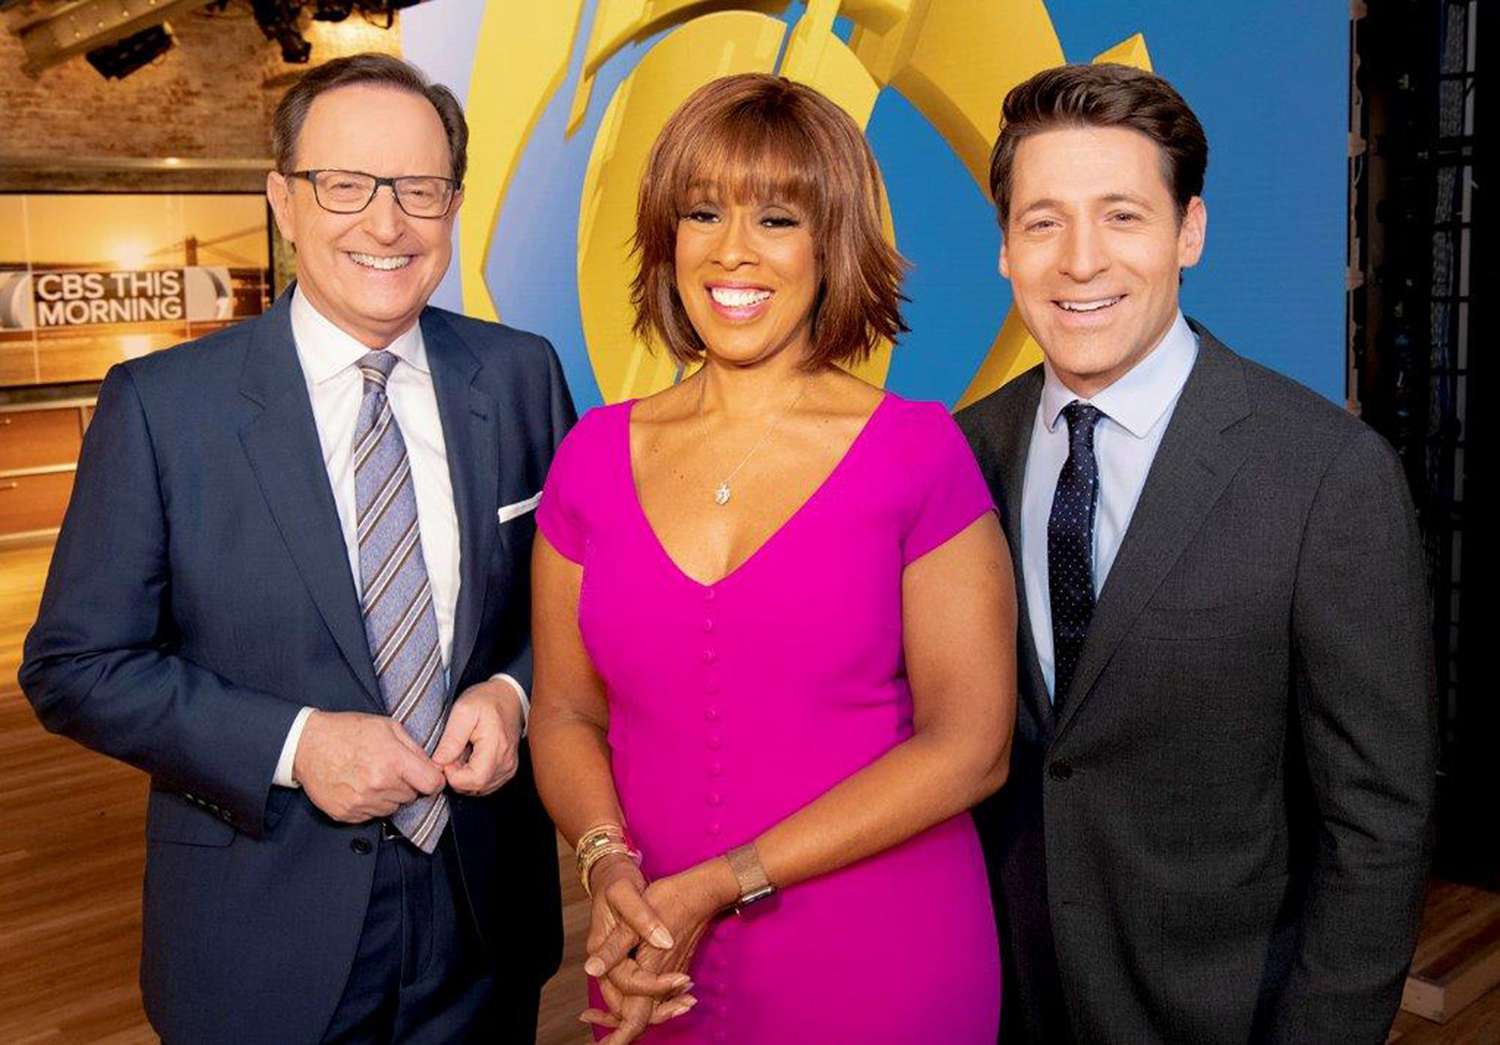 CBS This Morning hosts